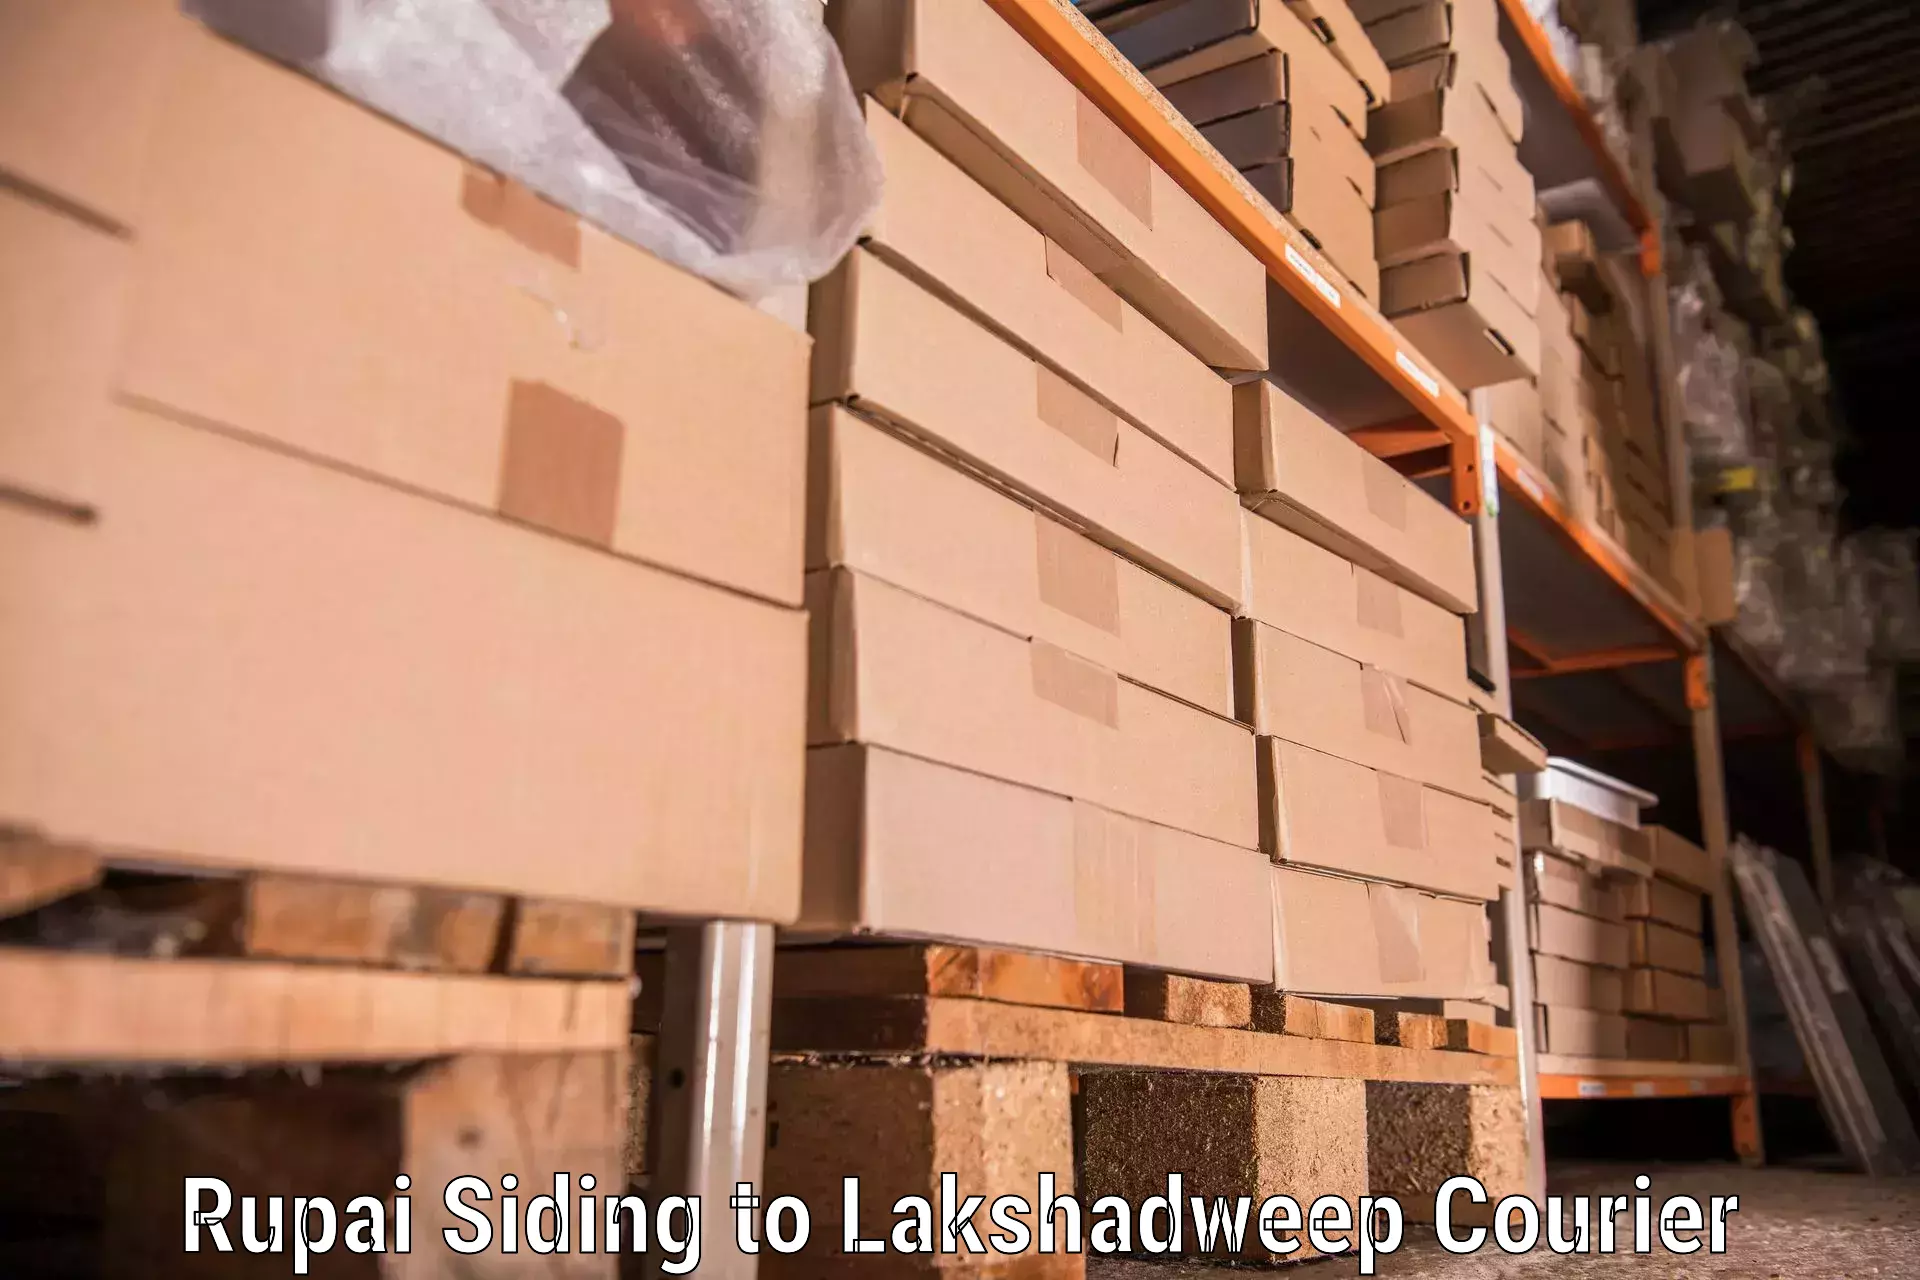 Quality moving and storage in Rupai Siding to Lakshadweep